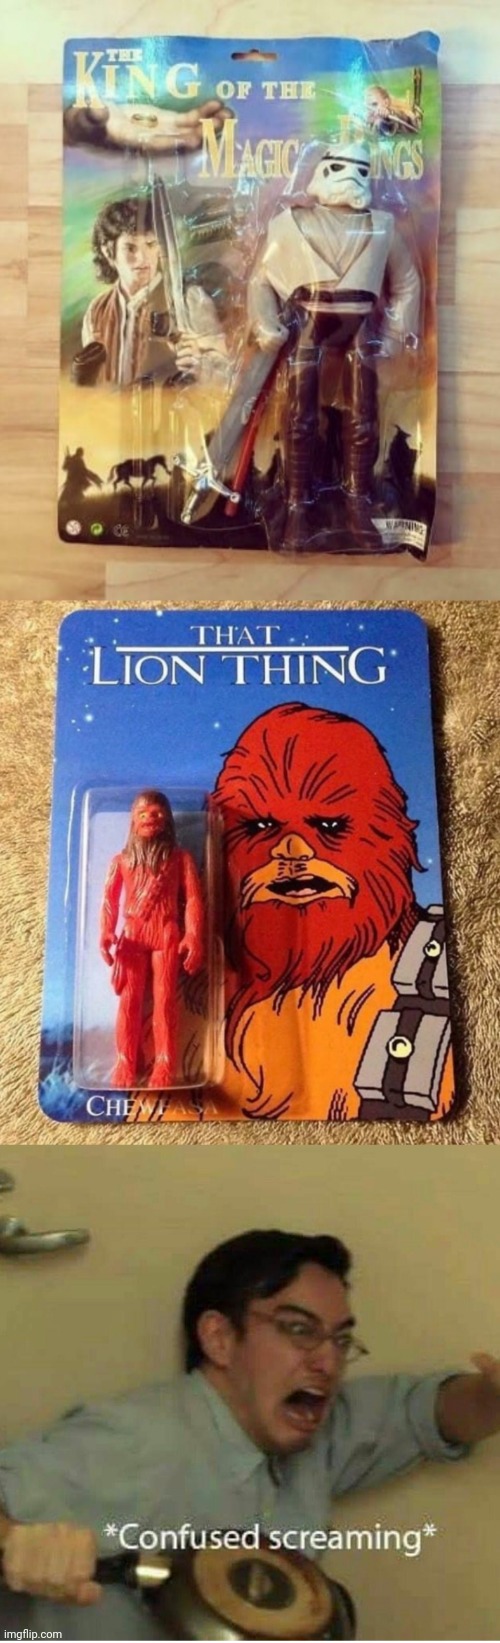 Star Rings and Lion Things- the legend of Bilbo Fett and Chewfasa | image tagged in confused screaming,lord of the rings,star wars,chewbacca,the lion king | made w/ Imgflip meme maker